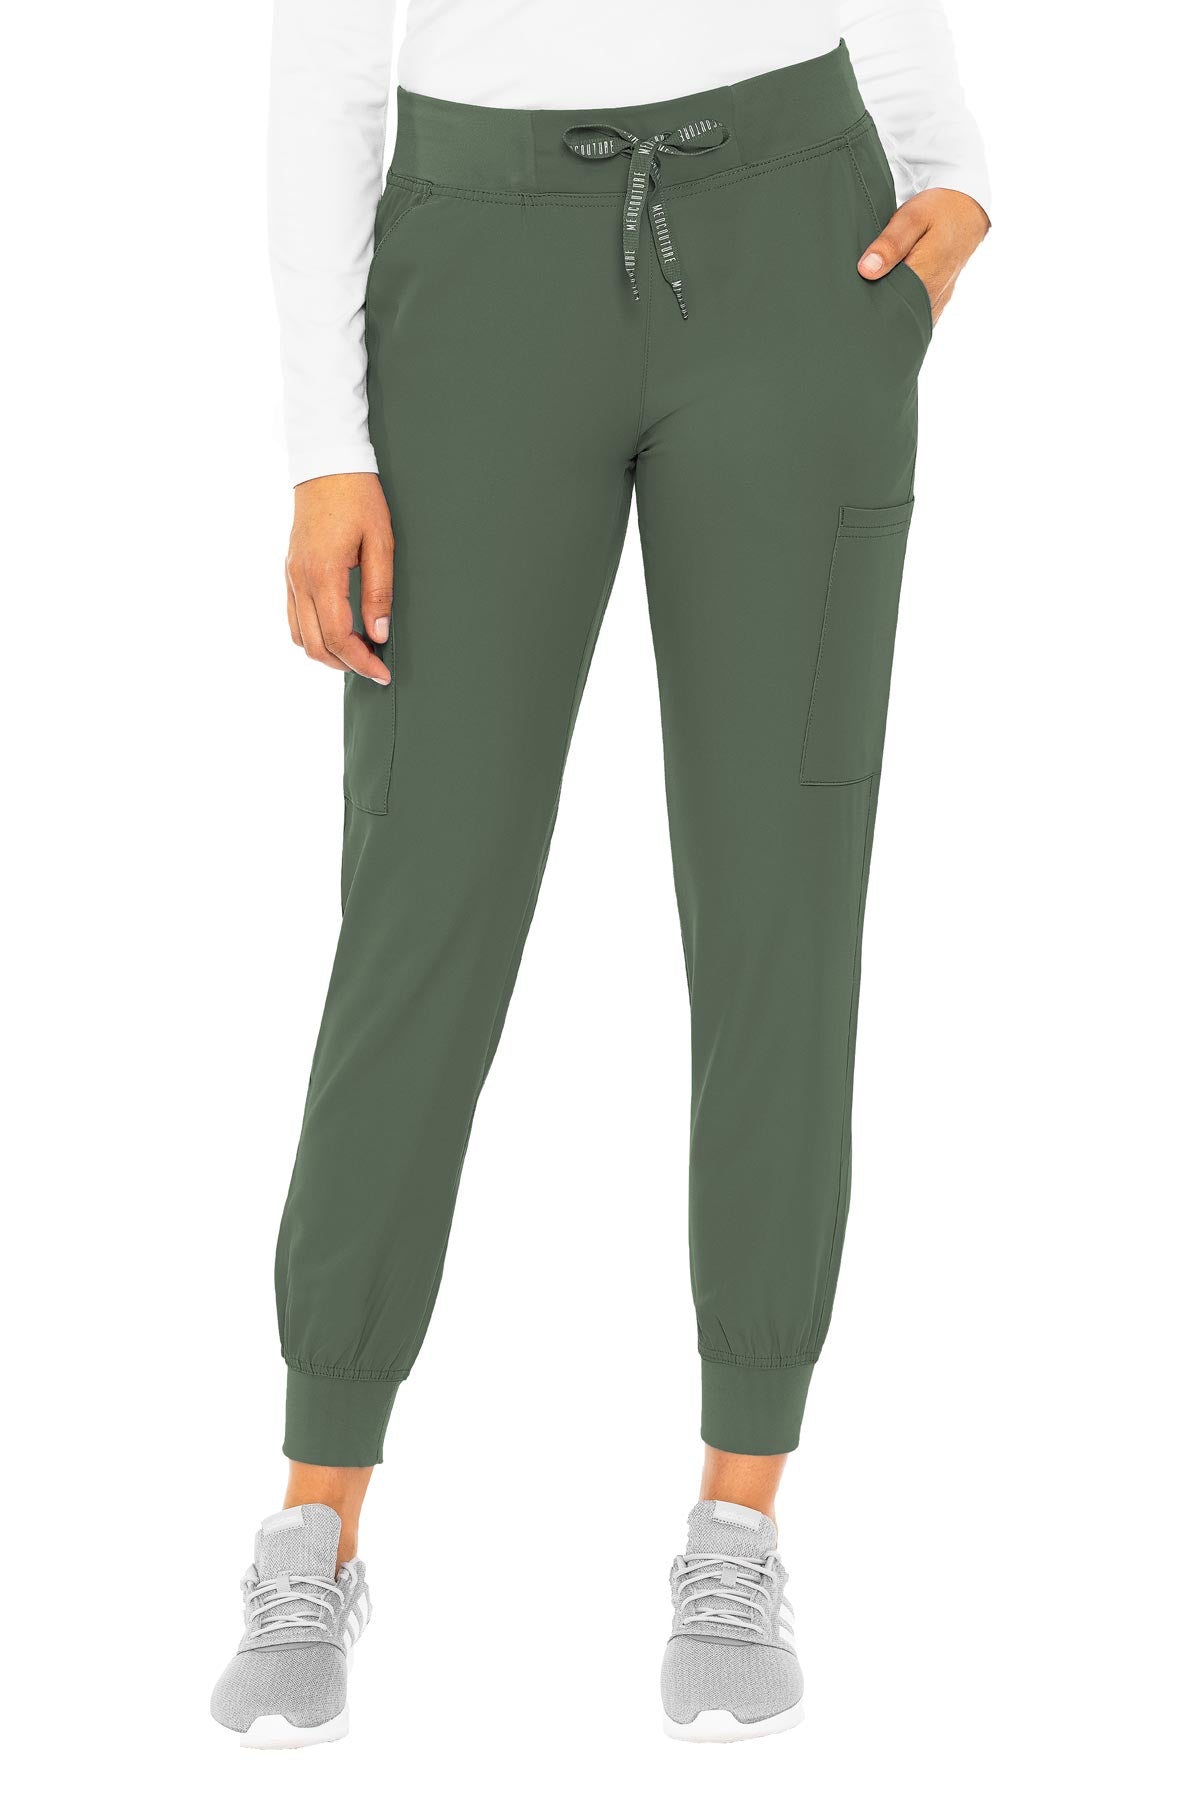 Med Couture Scrub Pants Insight Jogger Pant in Olive at Parker's Clothing and Shoes.